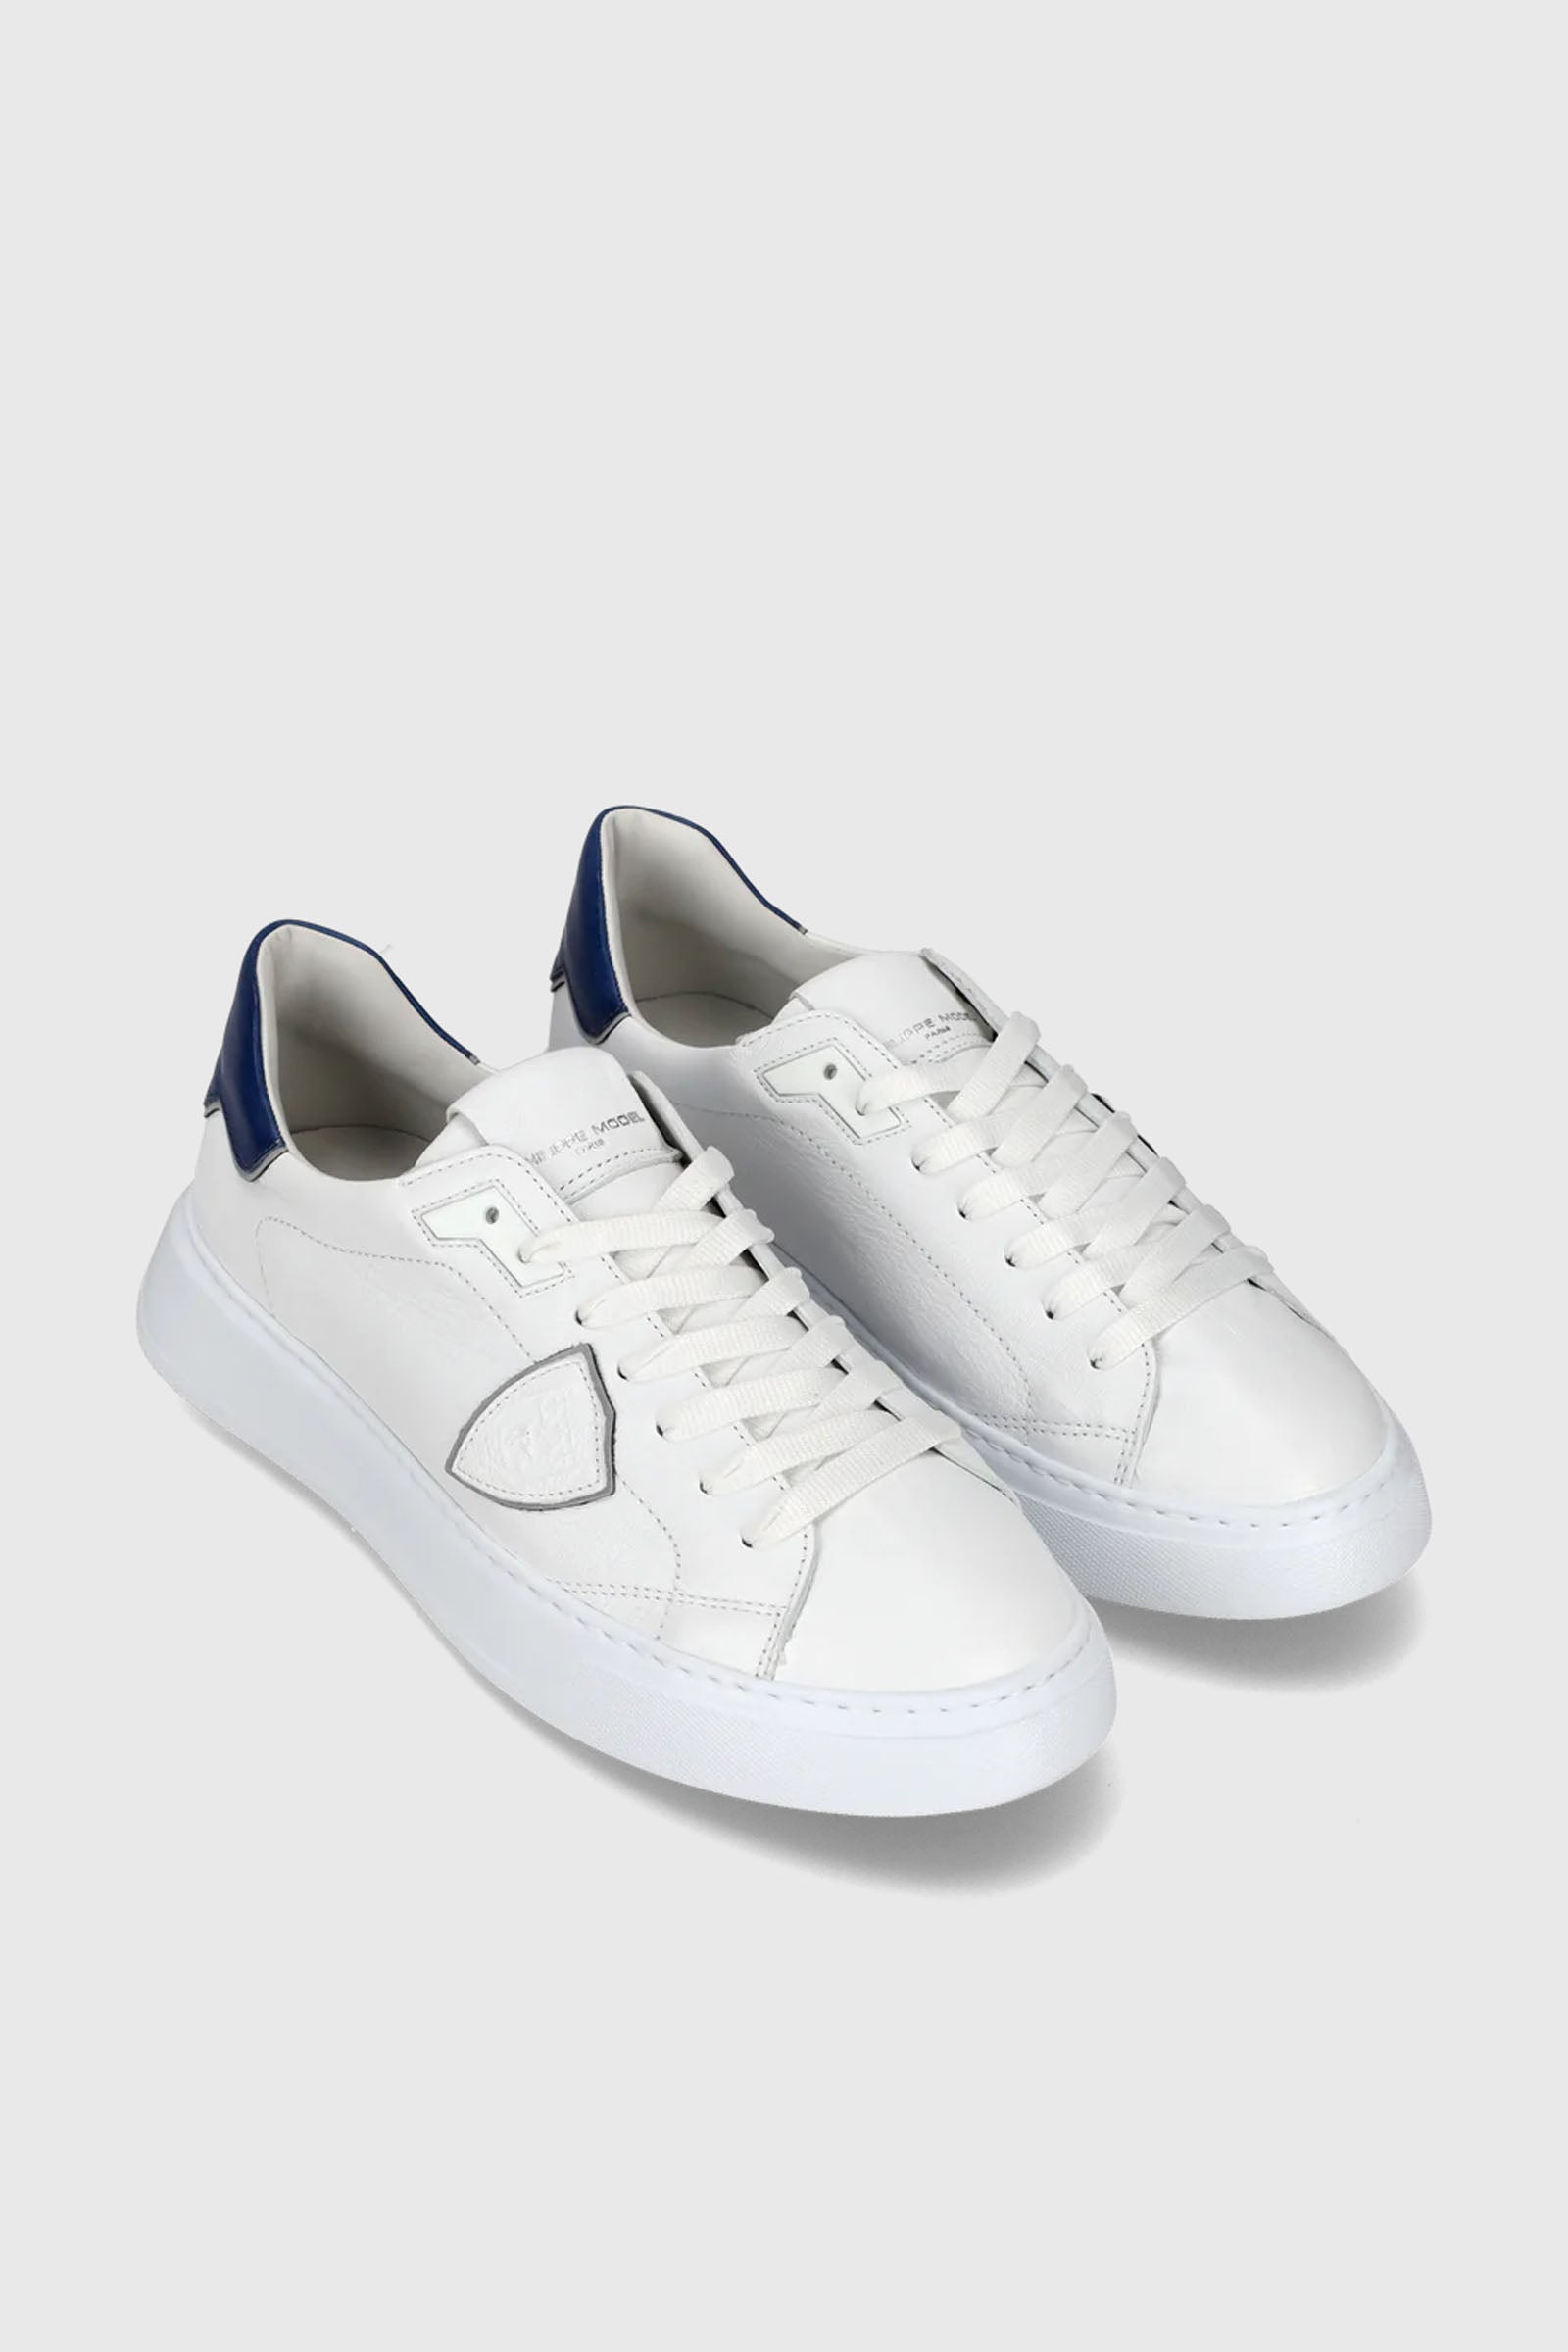 Philippe Model Sneaker Temple West Leather White/Blue - 2